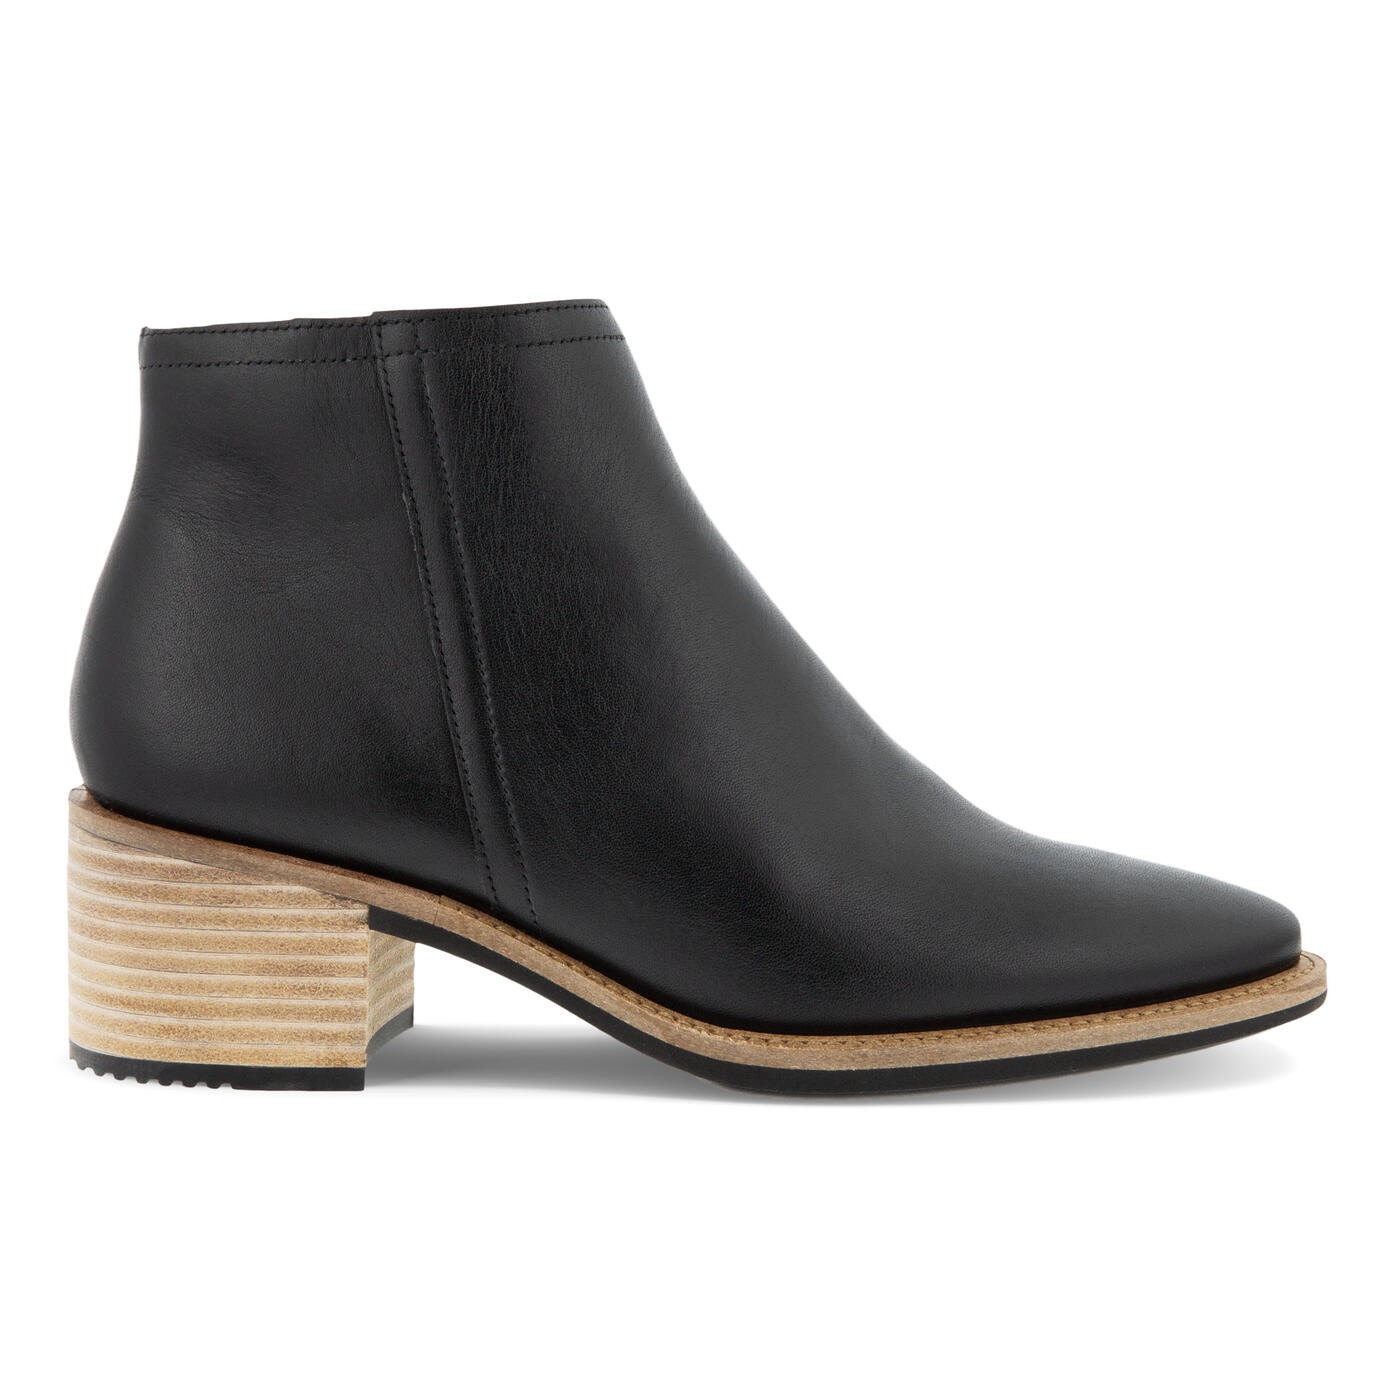 ECCO 女高跟短靴 WOMEN'S SARTORELLE SHAPE 35 ANKLE BOOT | Official ECCO® Shoes